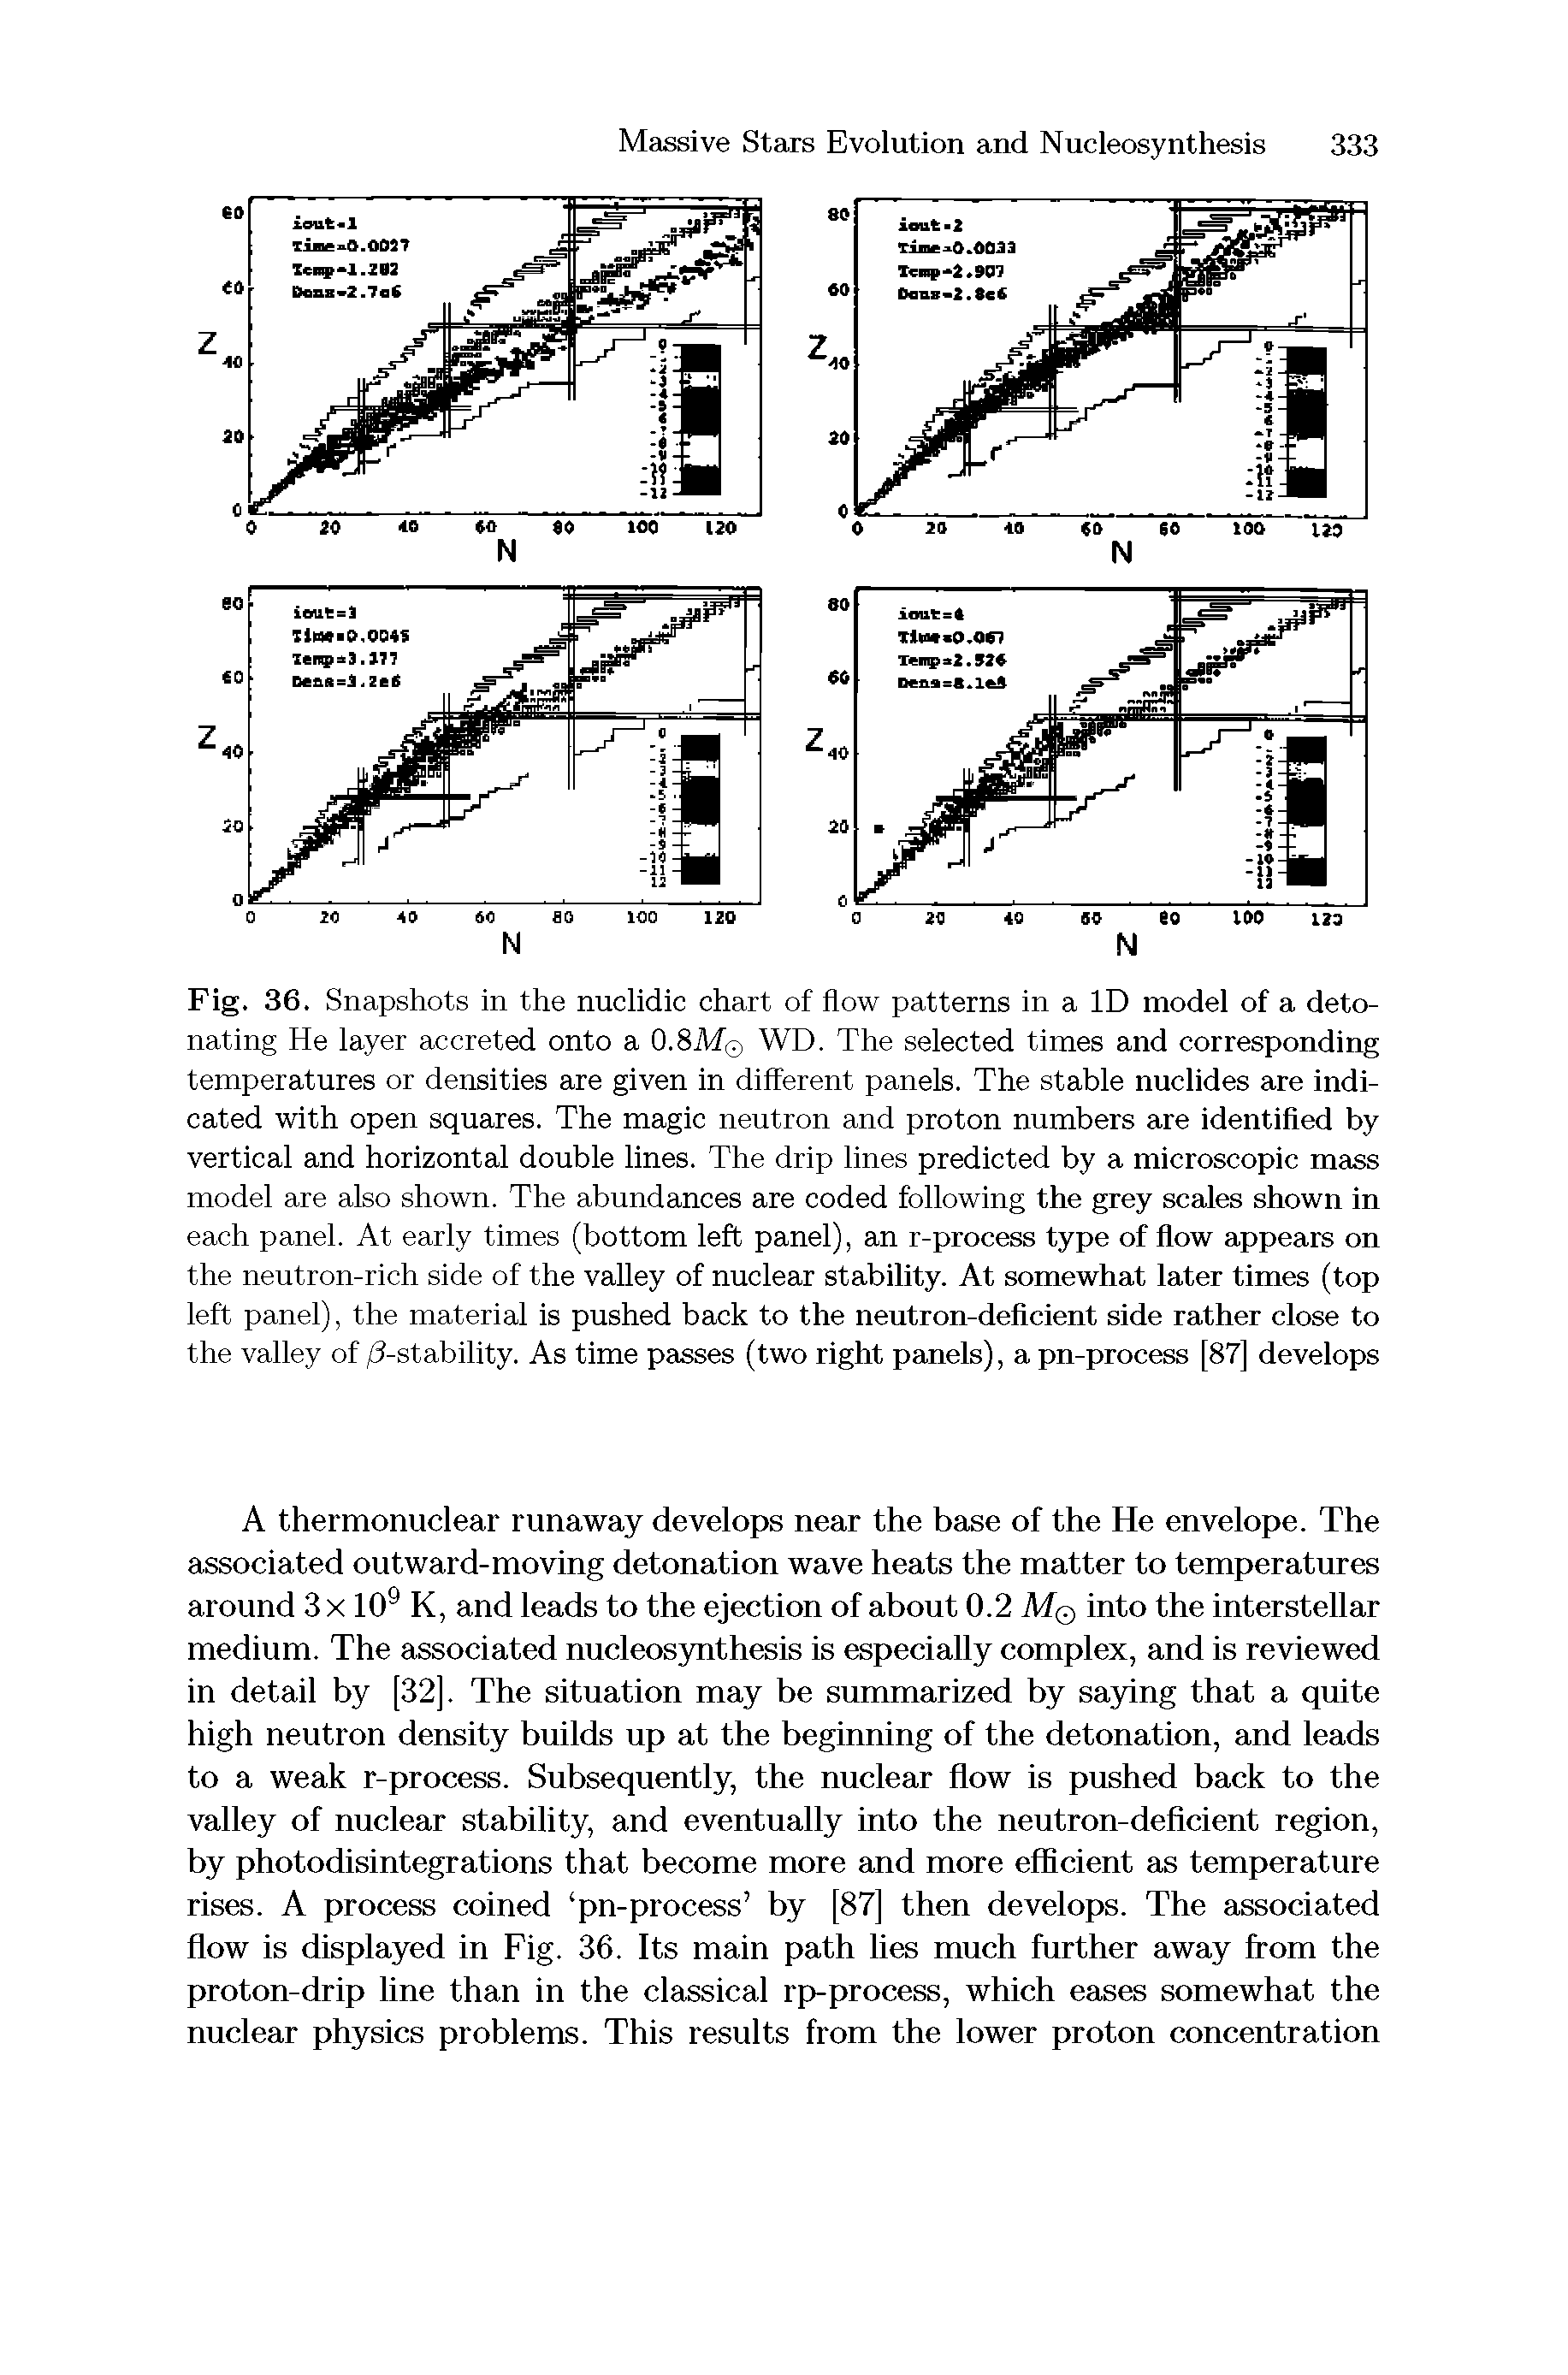 Fig. 36. Snapshots in the nuclidic chart of flow patterns in a ID model of a detonating He layer accreted onto a 0.8M WD. The selected times and corresponding temperatures or densities are given in different panels. The stable nuclides are indicated with open squares. The magic neutron and proton numbers are identified by vertical and horizontal double lines. The drip lines predicted by a microscopic mass model are also shown. The abundances are coded following the grey scales shown in each panel. At early times (bottom left panel), an r-process type of flow appears on the neutron-rich side of the valley of nuclear stability. At somewhat later times (top left panel), the material is pushed back to the neutron-deficient side rather close to the valley of /3-stability. As time passes (two right panels), a pn-process [87] develops...